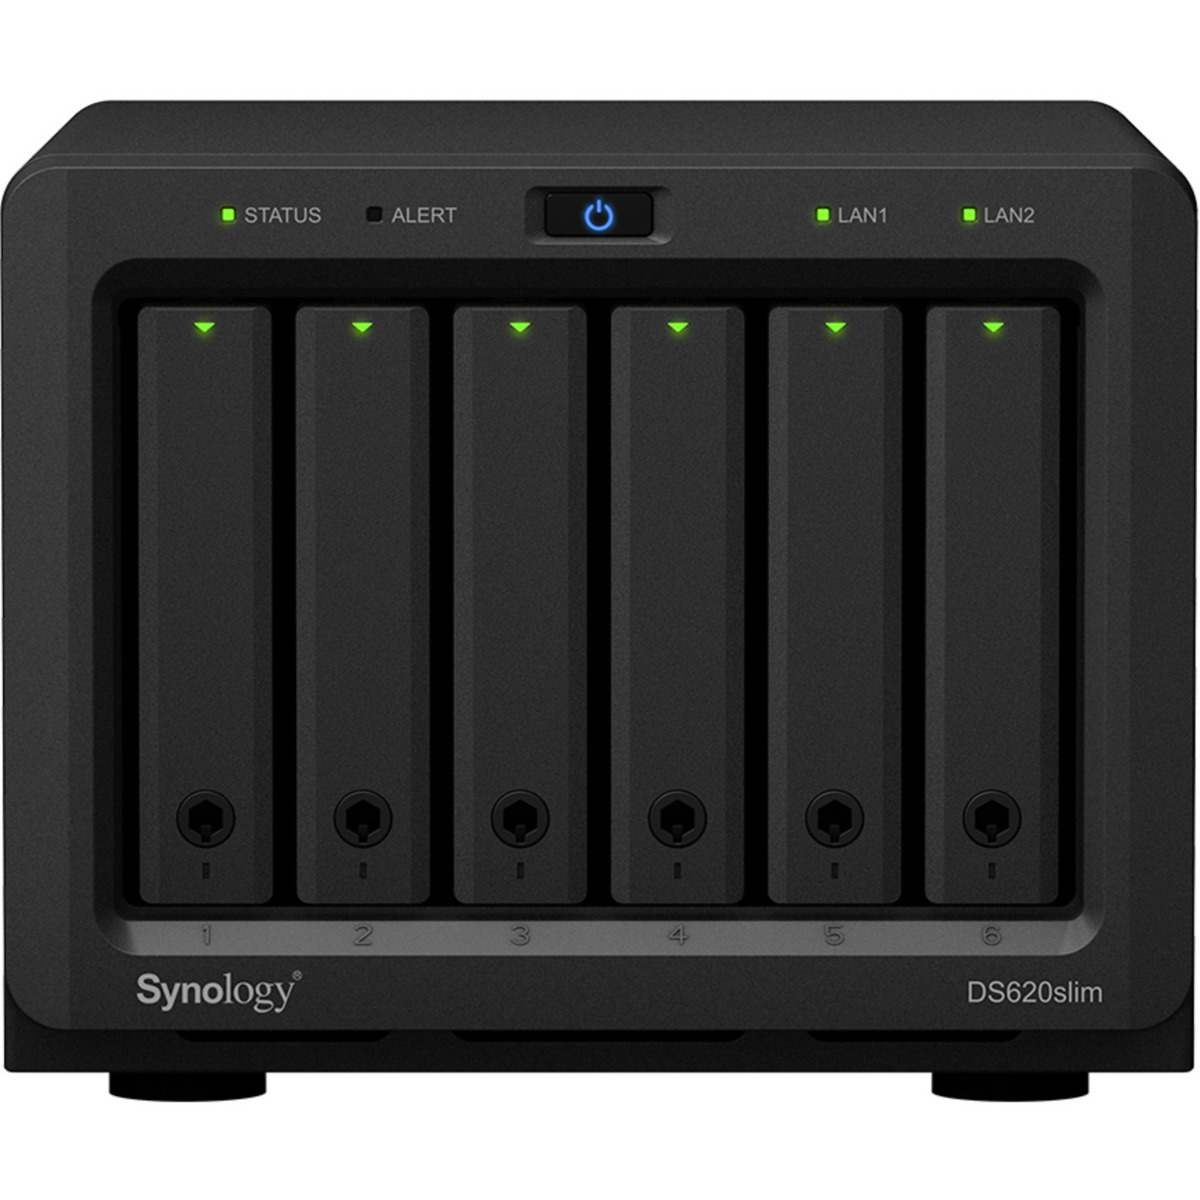 Synology DiskStation DS620slim 3tb 6-Bay Desktop Multimedia / Power User / Business NAS - Network Attached Storage Device 3x1tb Western Digital Red SA500 WDS100T1R0A 2.5 560/530MB/s SATA 6Gb/s SSD NAS Class Drives Installed - Burn-In Tested - FREE RAM UPGRADE DiskStation DS620slim